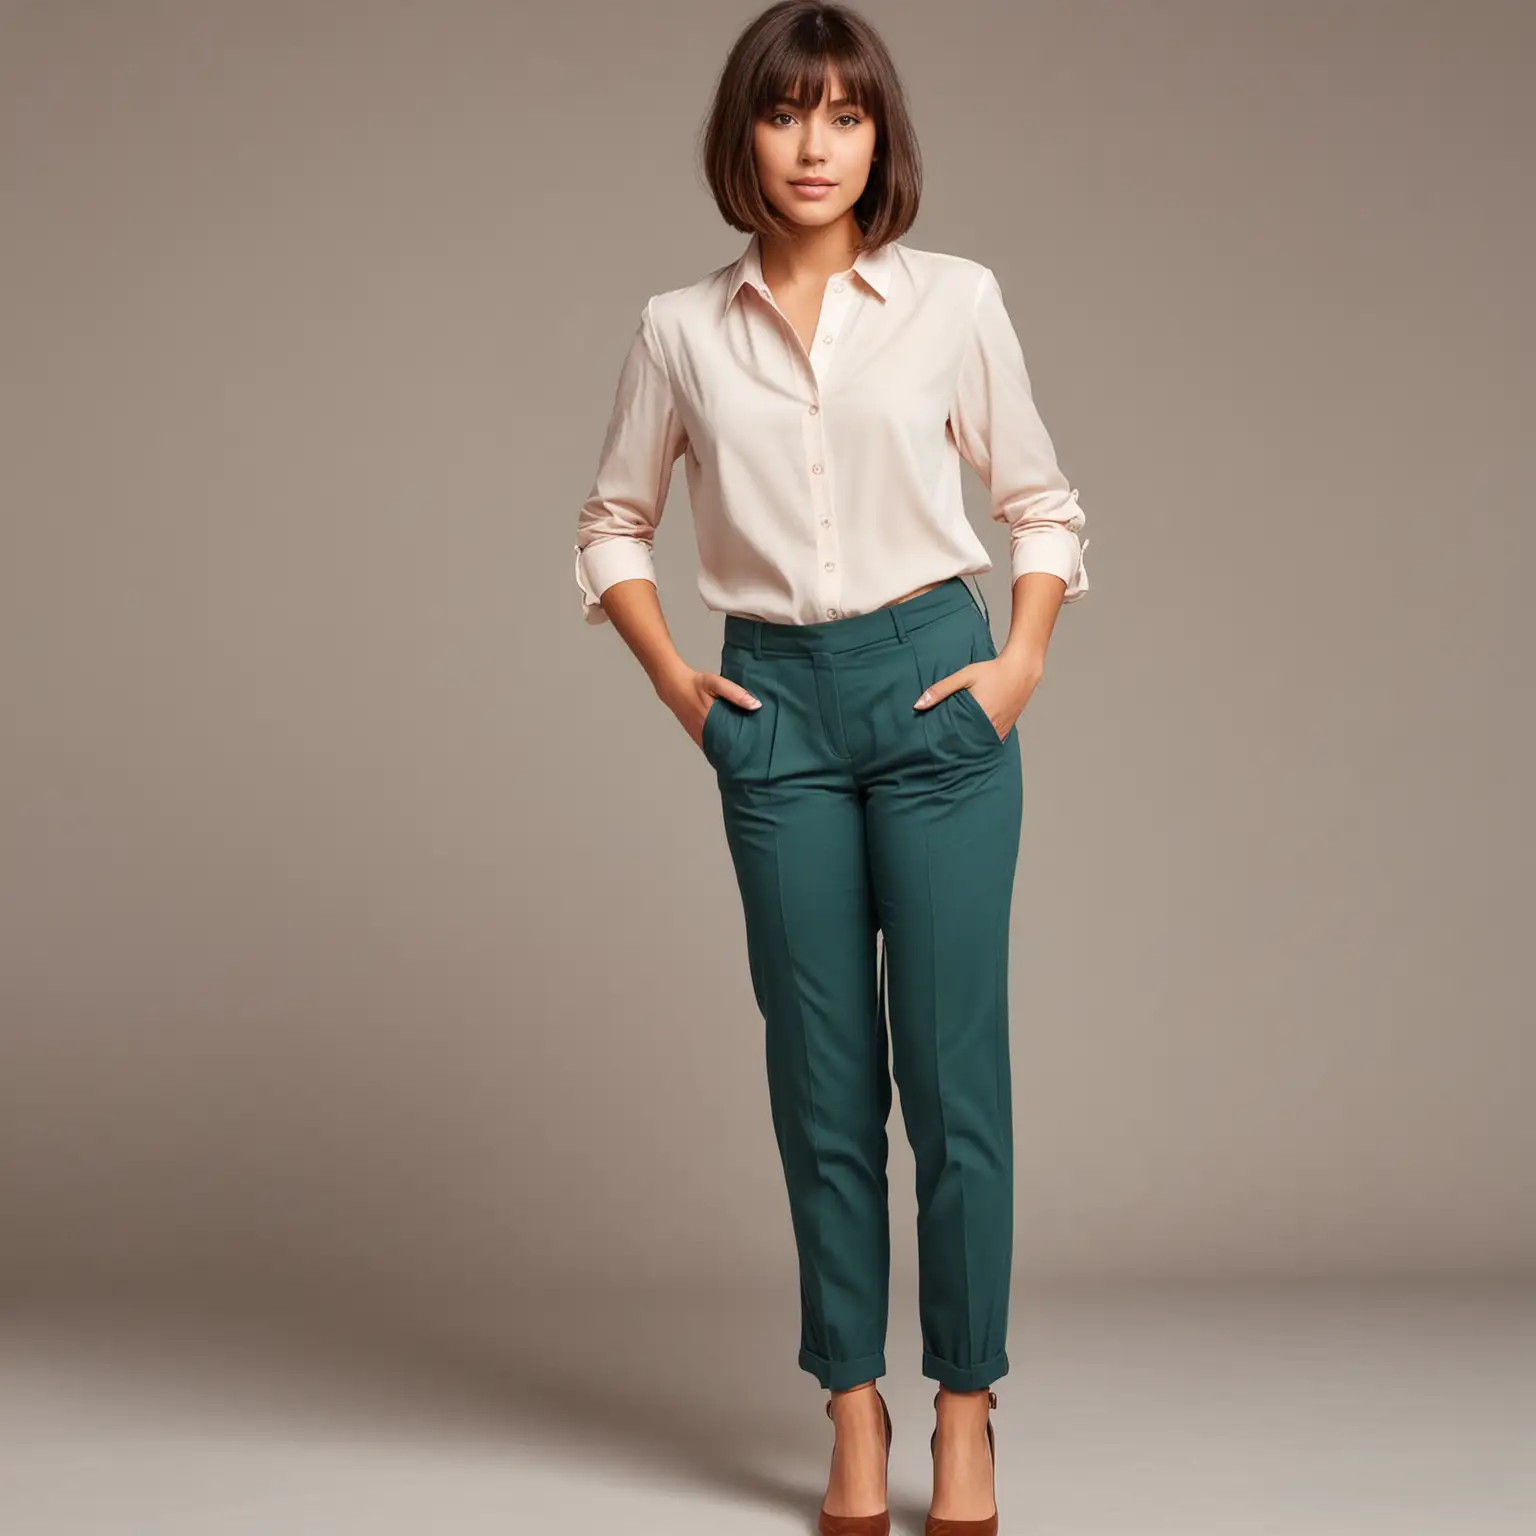 Latina Teen Girl Job Interview Outfit Stylish Bob Haircut and Tailored Attire